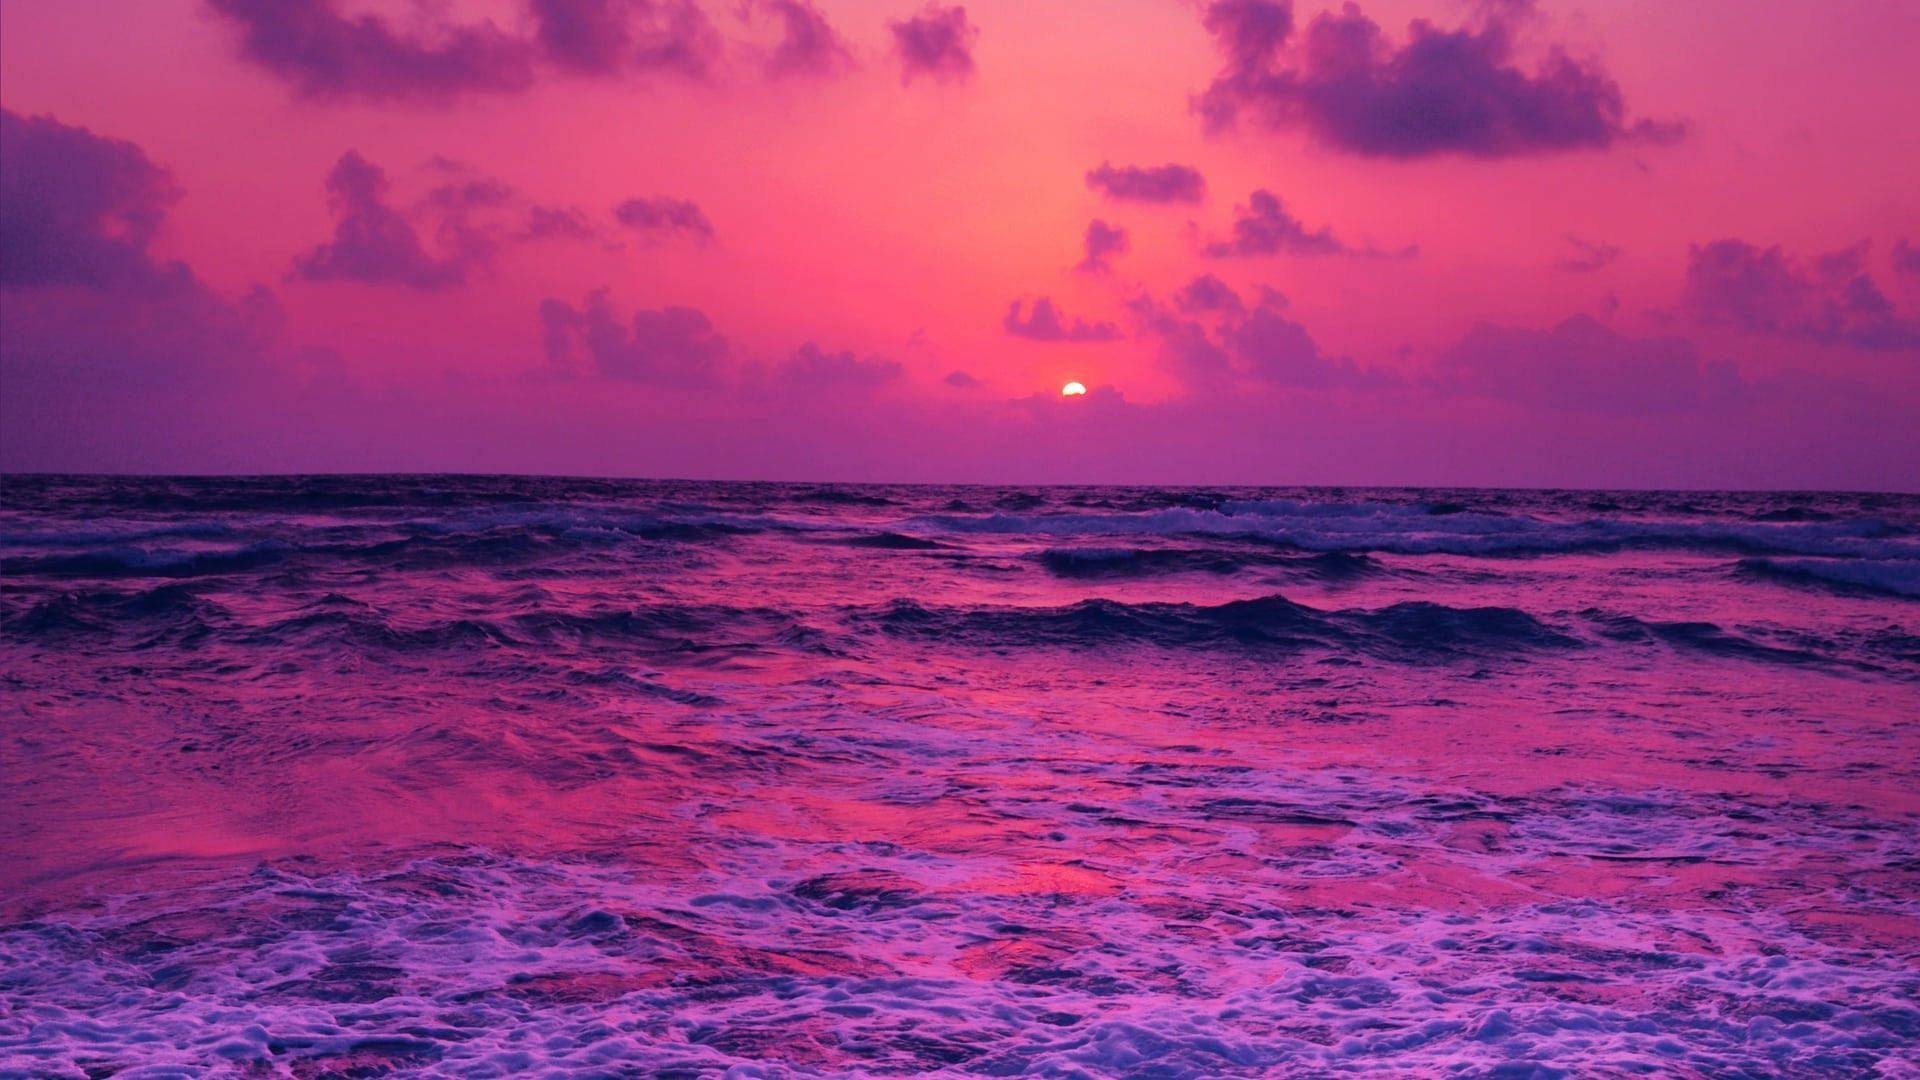 A sunset over the ocean with waves and clouds - Magenta